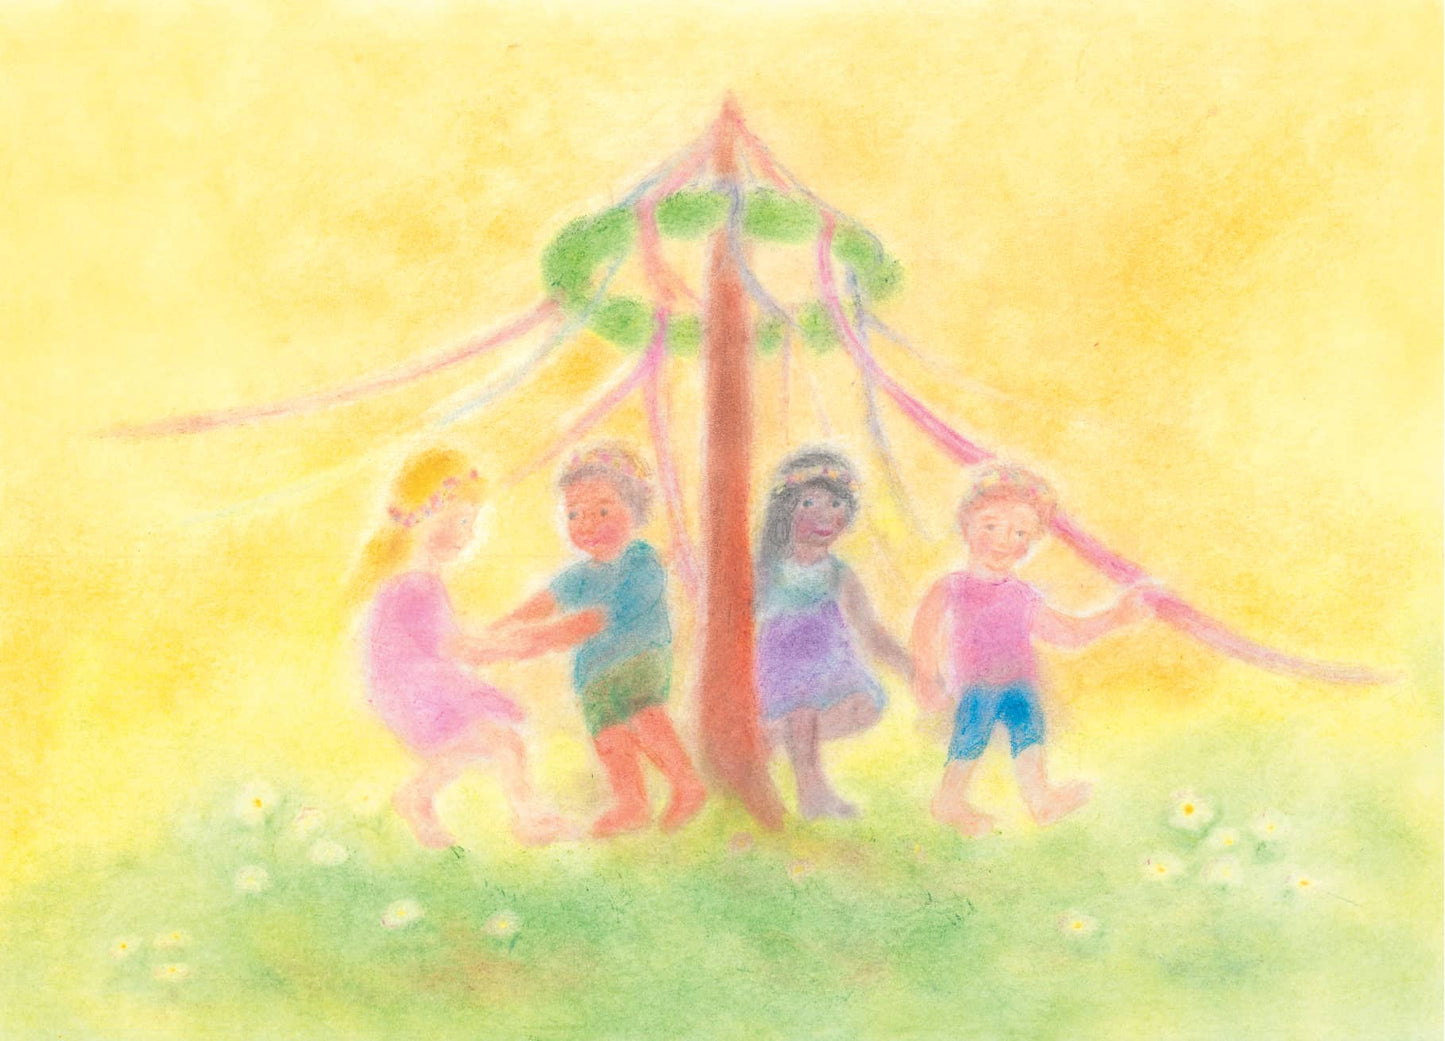 Seccorell postcard "May Dance" with children in a cheerful round dance around the maypole, depicted in delicate Seccorell colors.